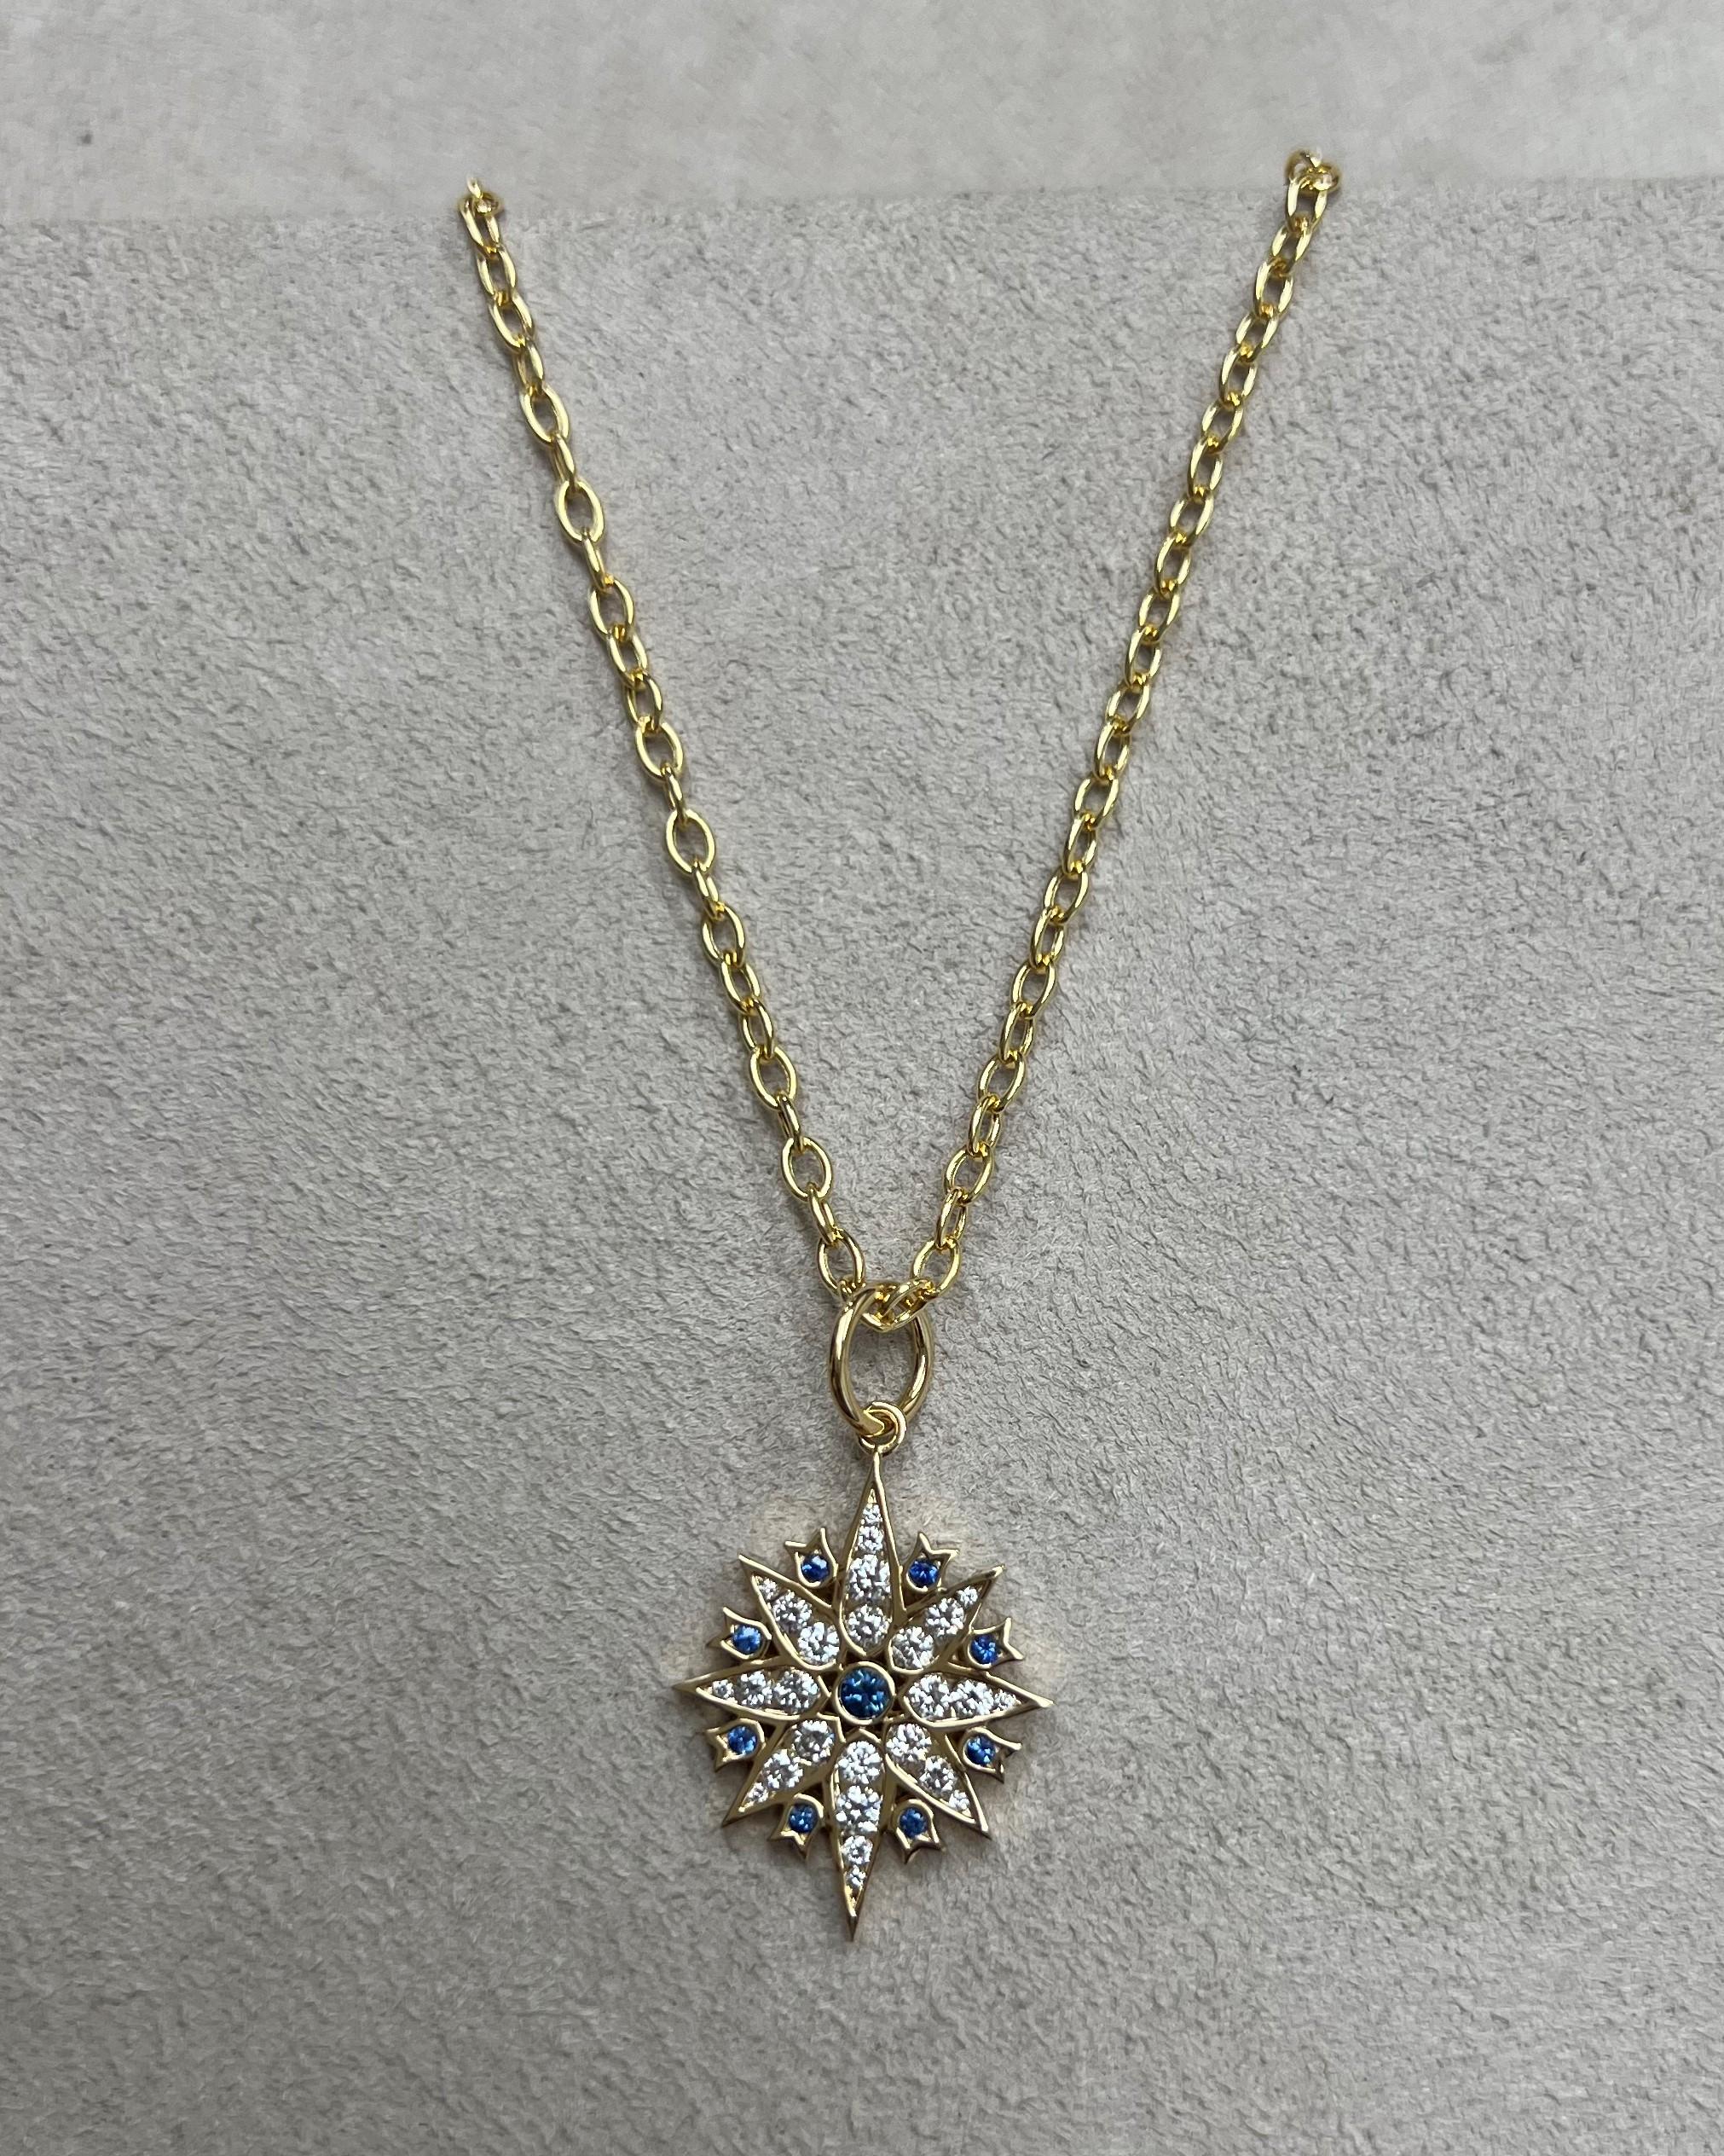 Created in 18 karat yellow gold
Blue sapphires 0.14 carat approx.
Diamonds 0.50 carat approx.
Limited edition
Chain sold separately

Exquisitely crafted in 18 karat yellow gold, this limited edition Taara Pendant is bejeweled with 0.14 carat